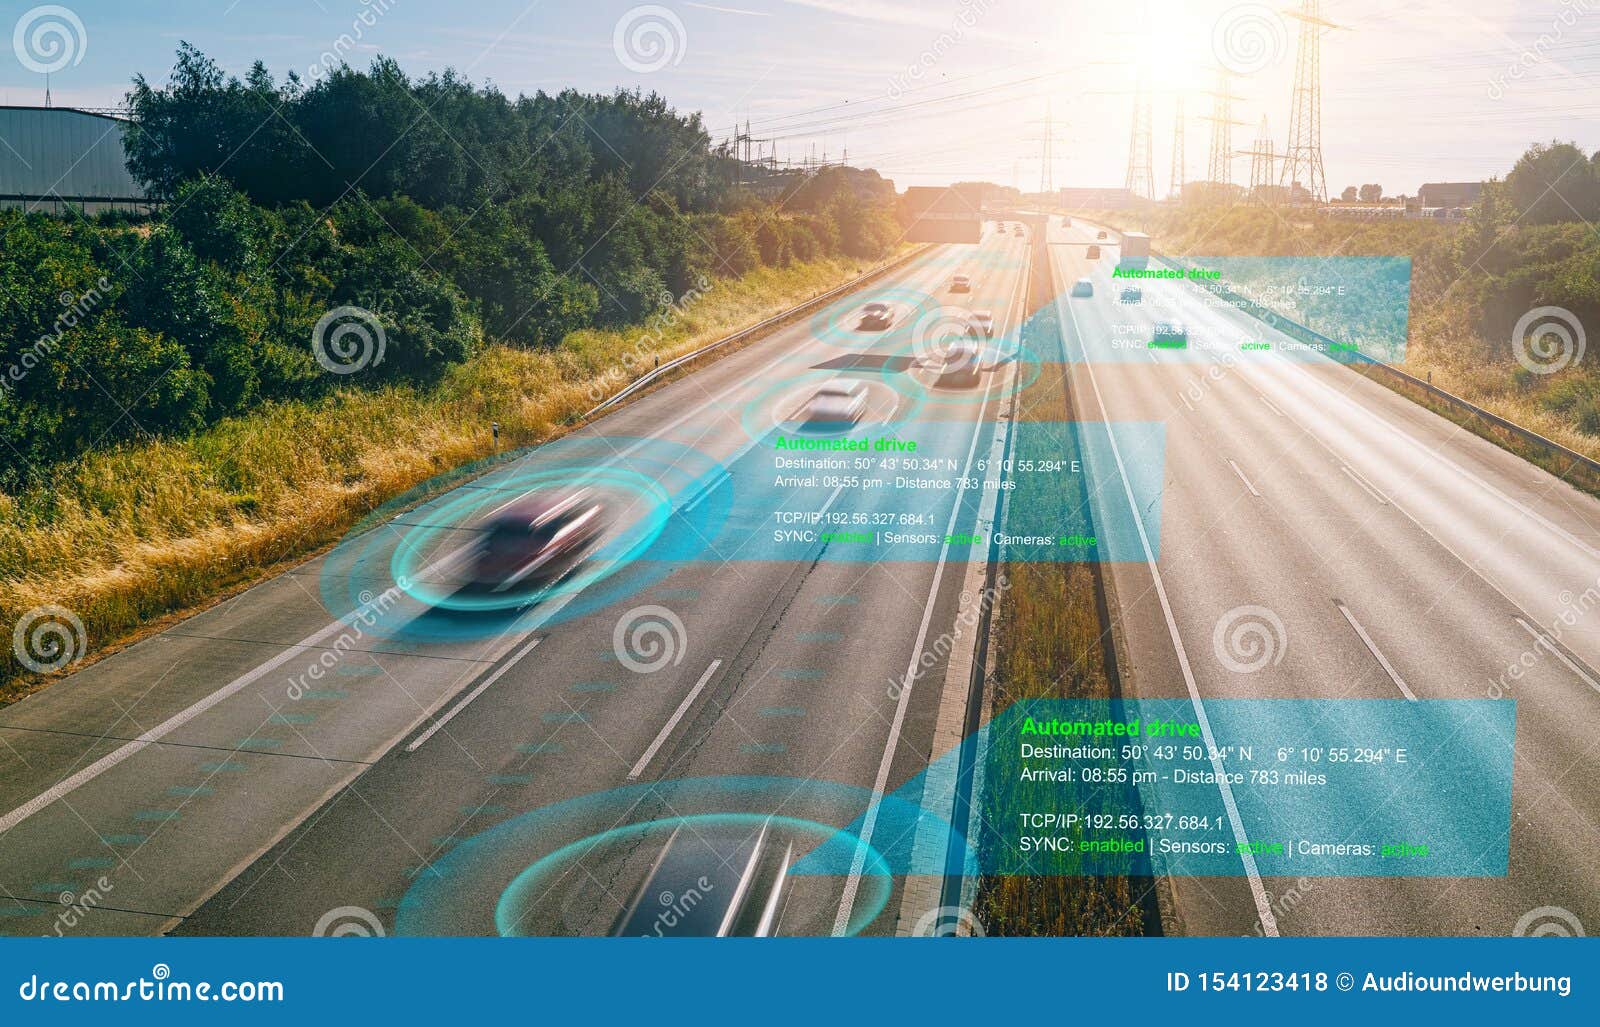 autonomous self-driving mode vehicle on highway road iot concept with graphic sensor radar signal system